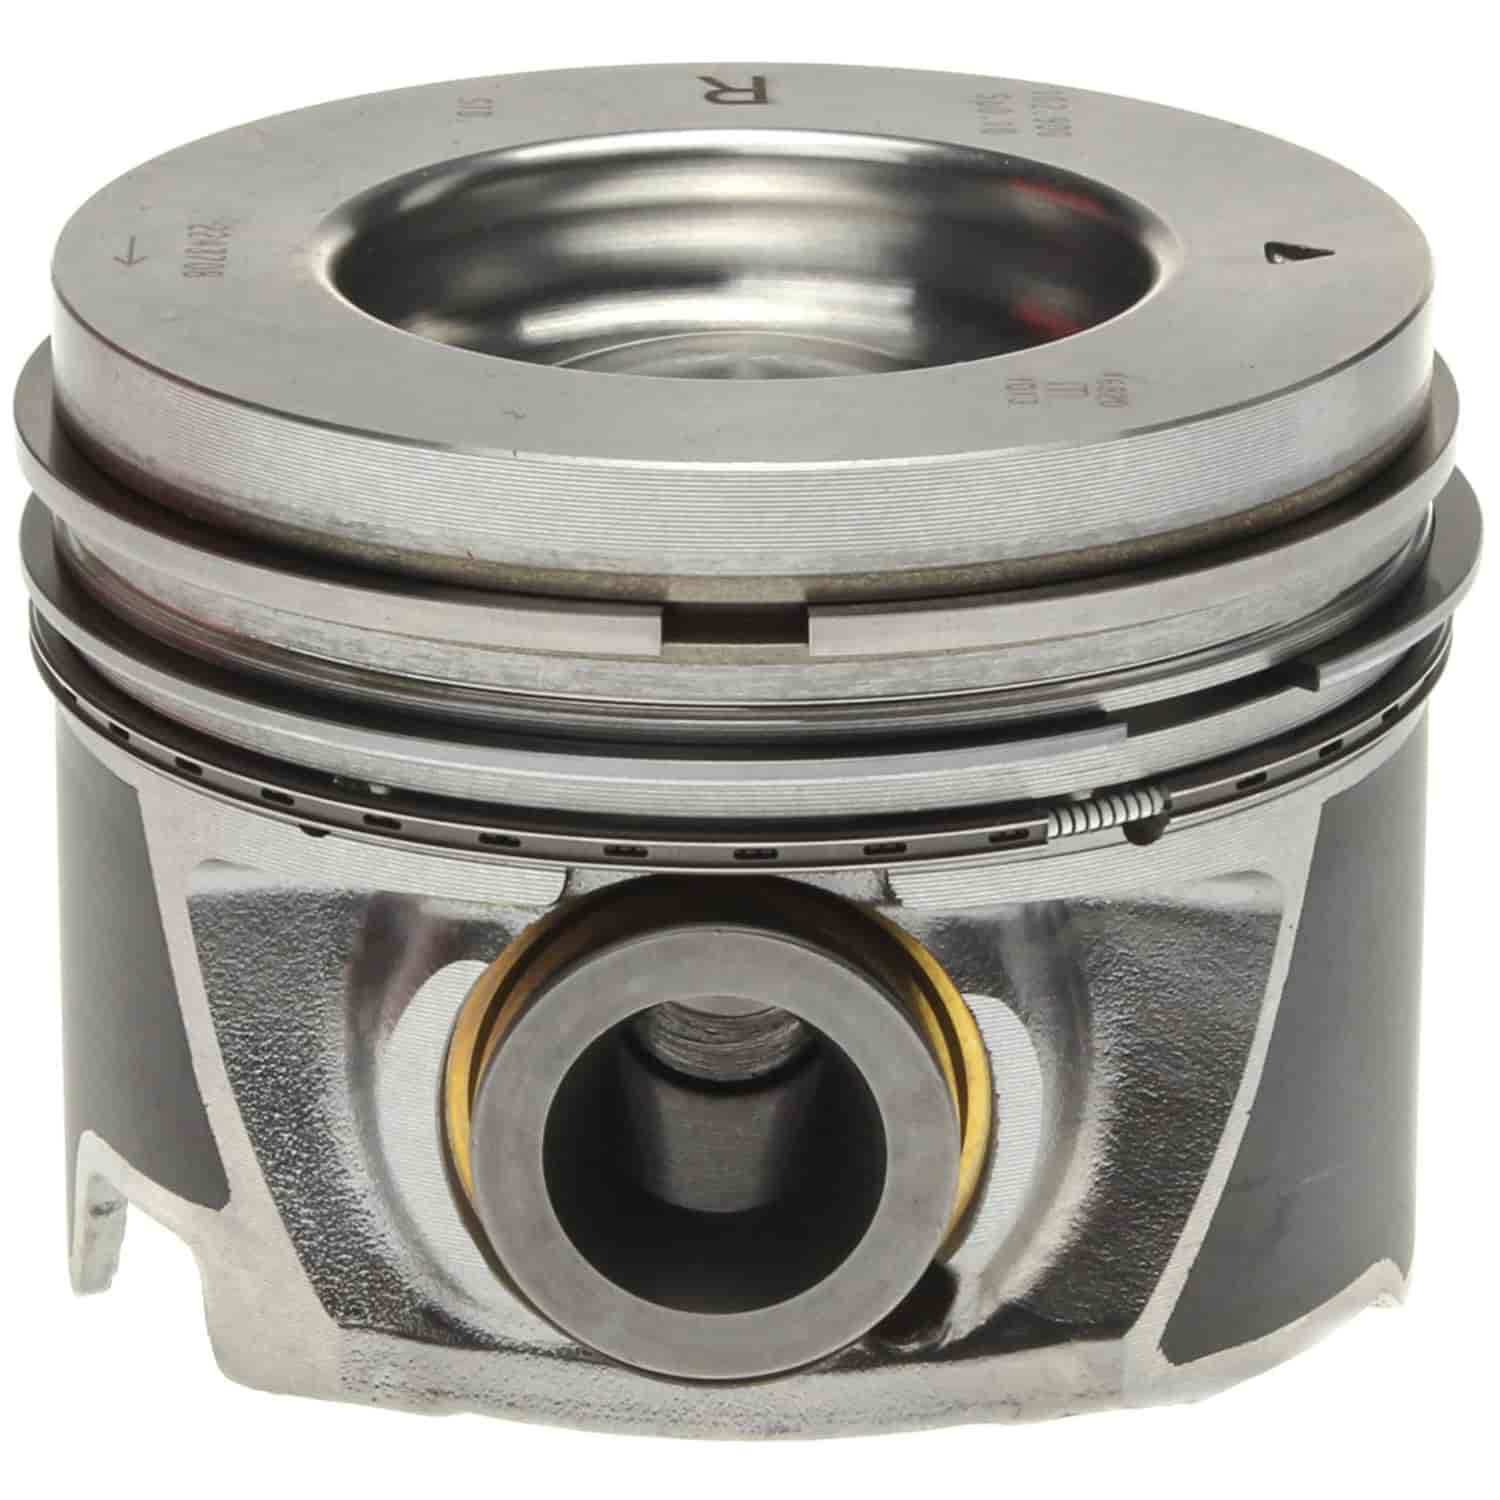 Piston and Rings Set 2006-2010 Chevy/GMC Duramax Diesel V8 6.6L Right Bank with 4.065" Bore (+.010")